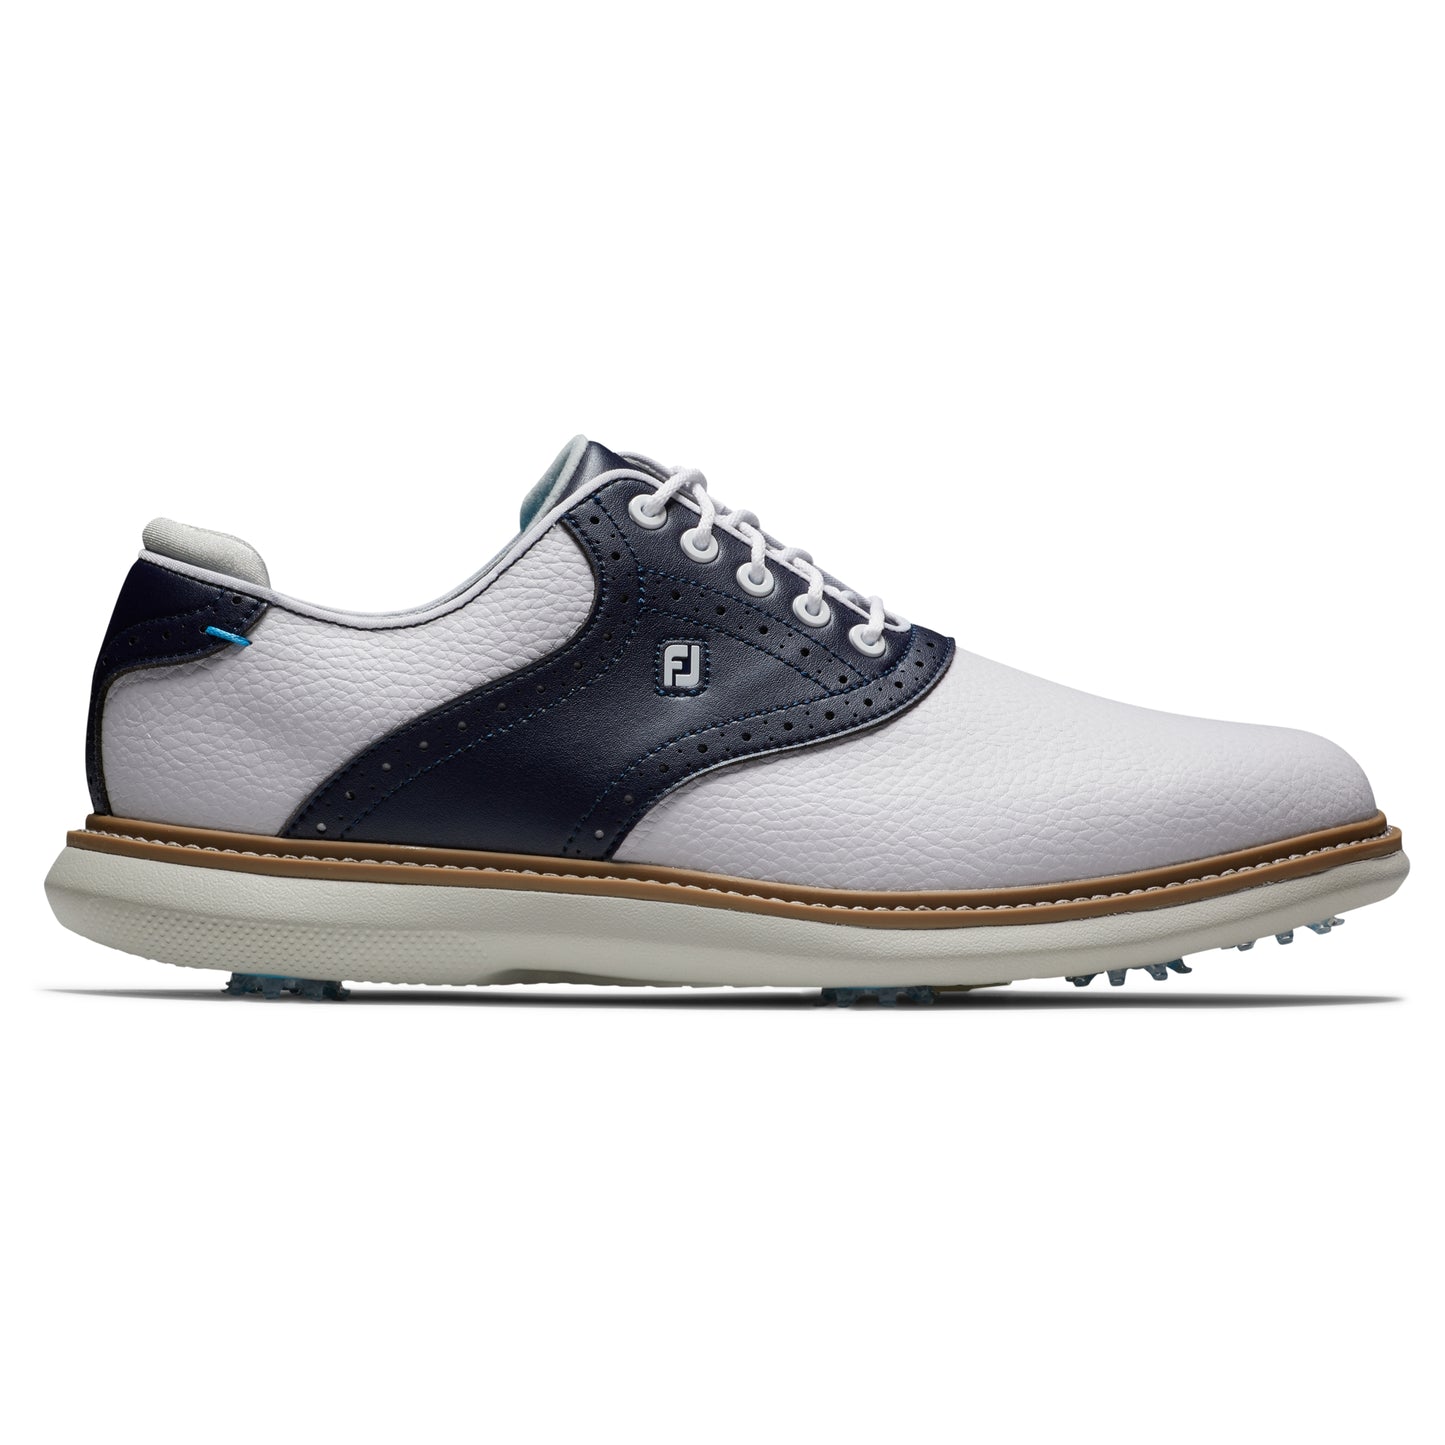 FootJoy Traditions Men's Golf Shoes 57899 - White/Navy